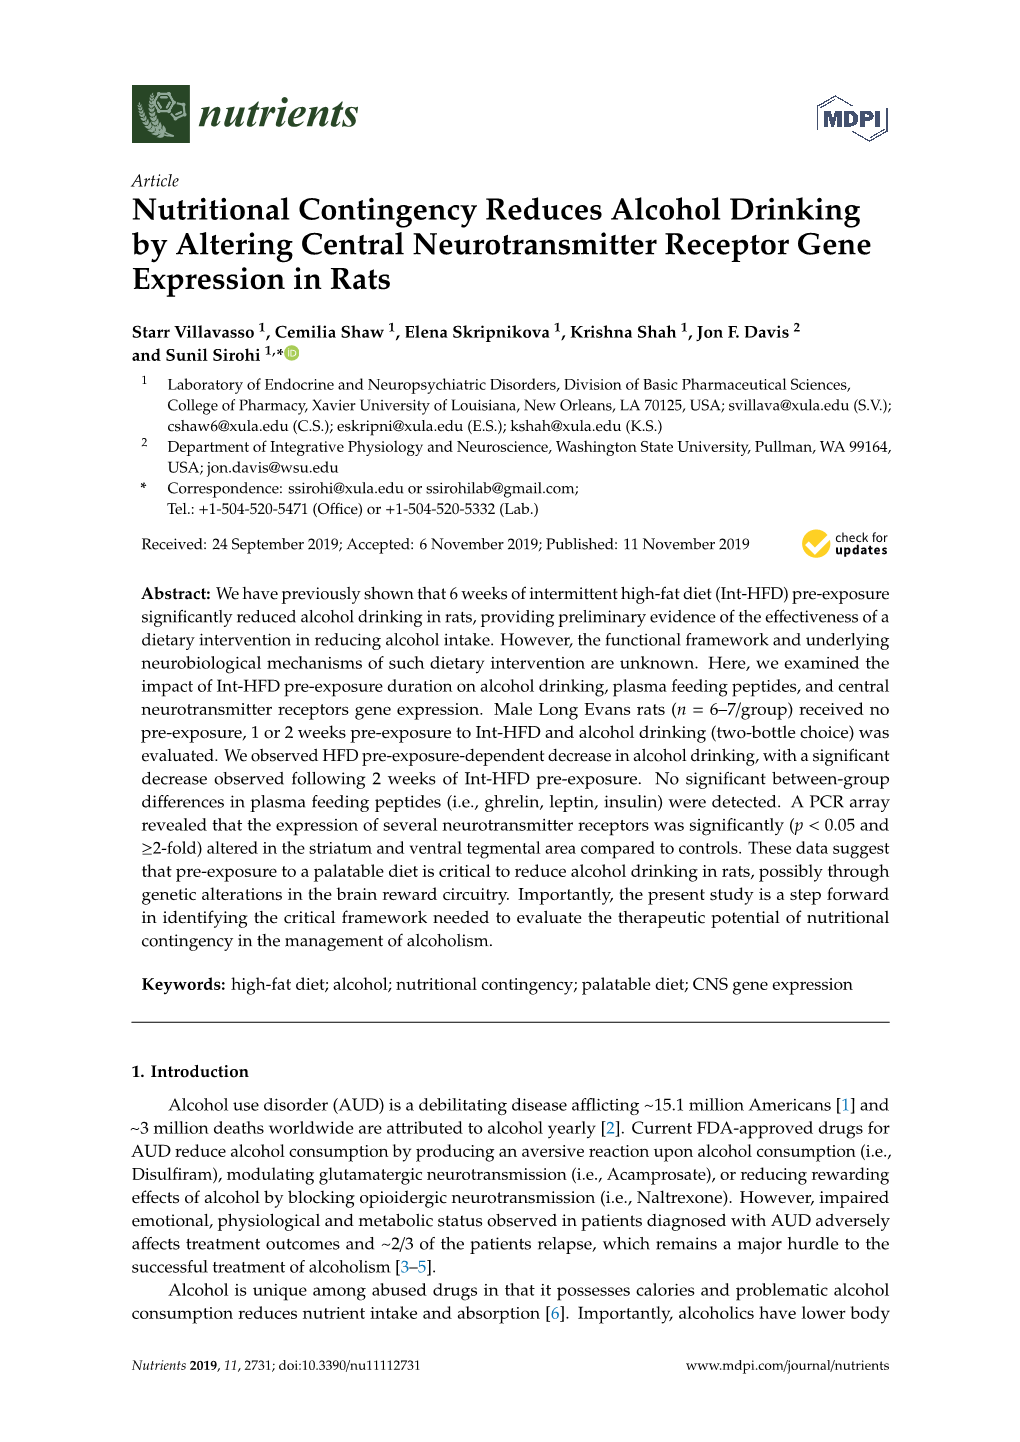 Nutritional Contingency Reduces Alcohol Drinking by Altering Central Neurotransmitter Receptor Gene Expression in Rats